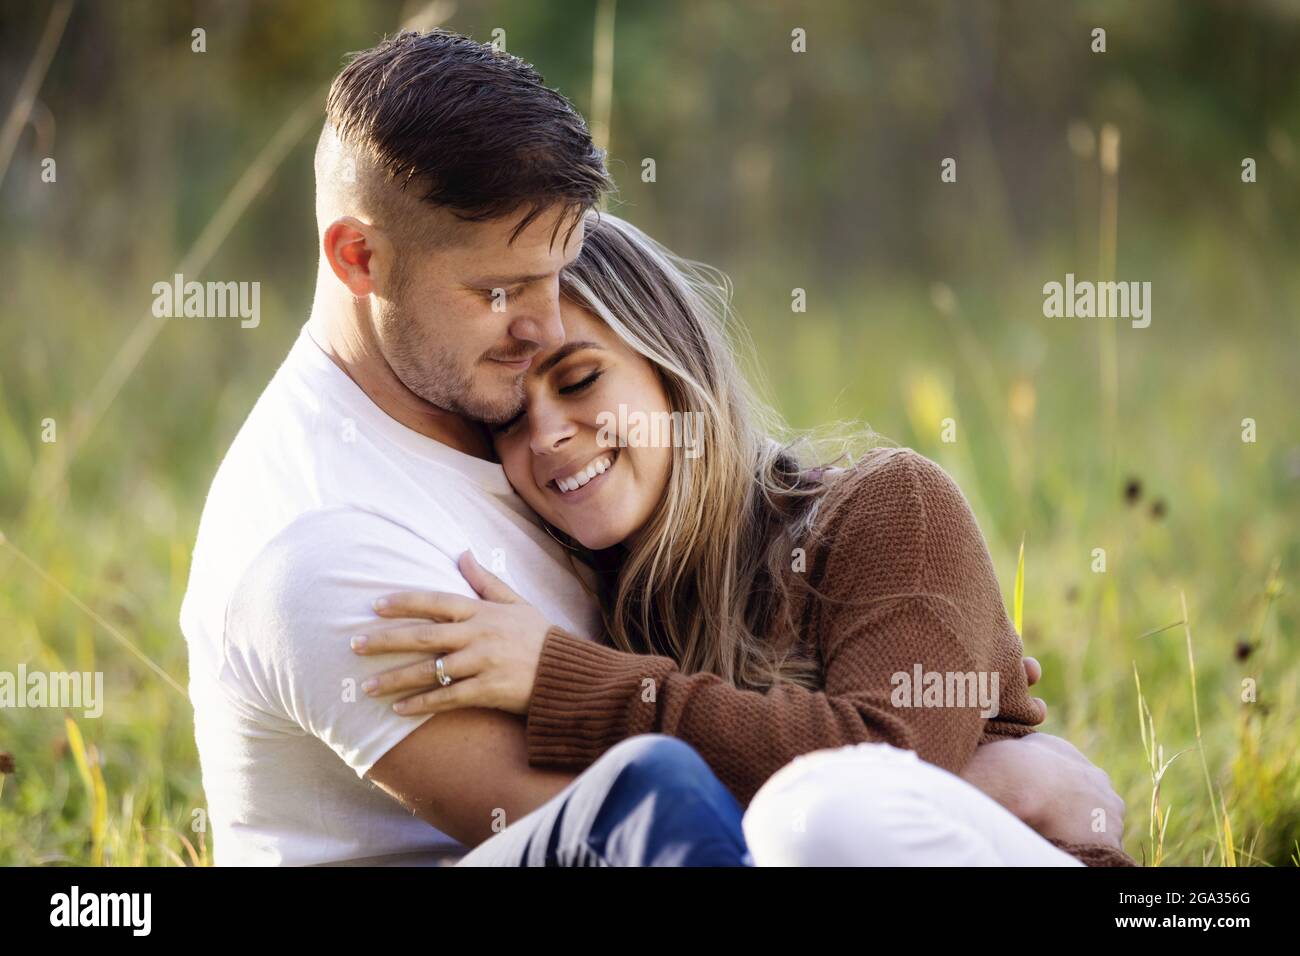 A husband and wife spending quality time together outoors in a city park; Edmonton, Alberta, Canada Stock Photo